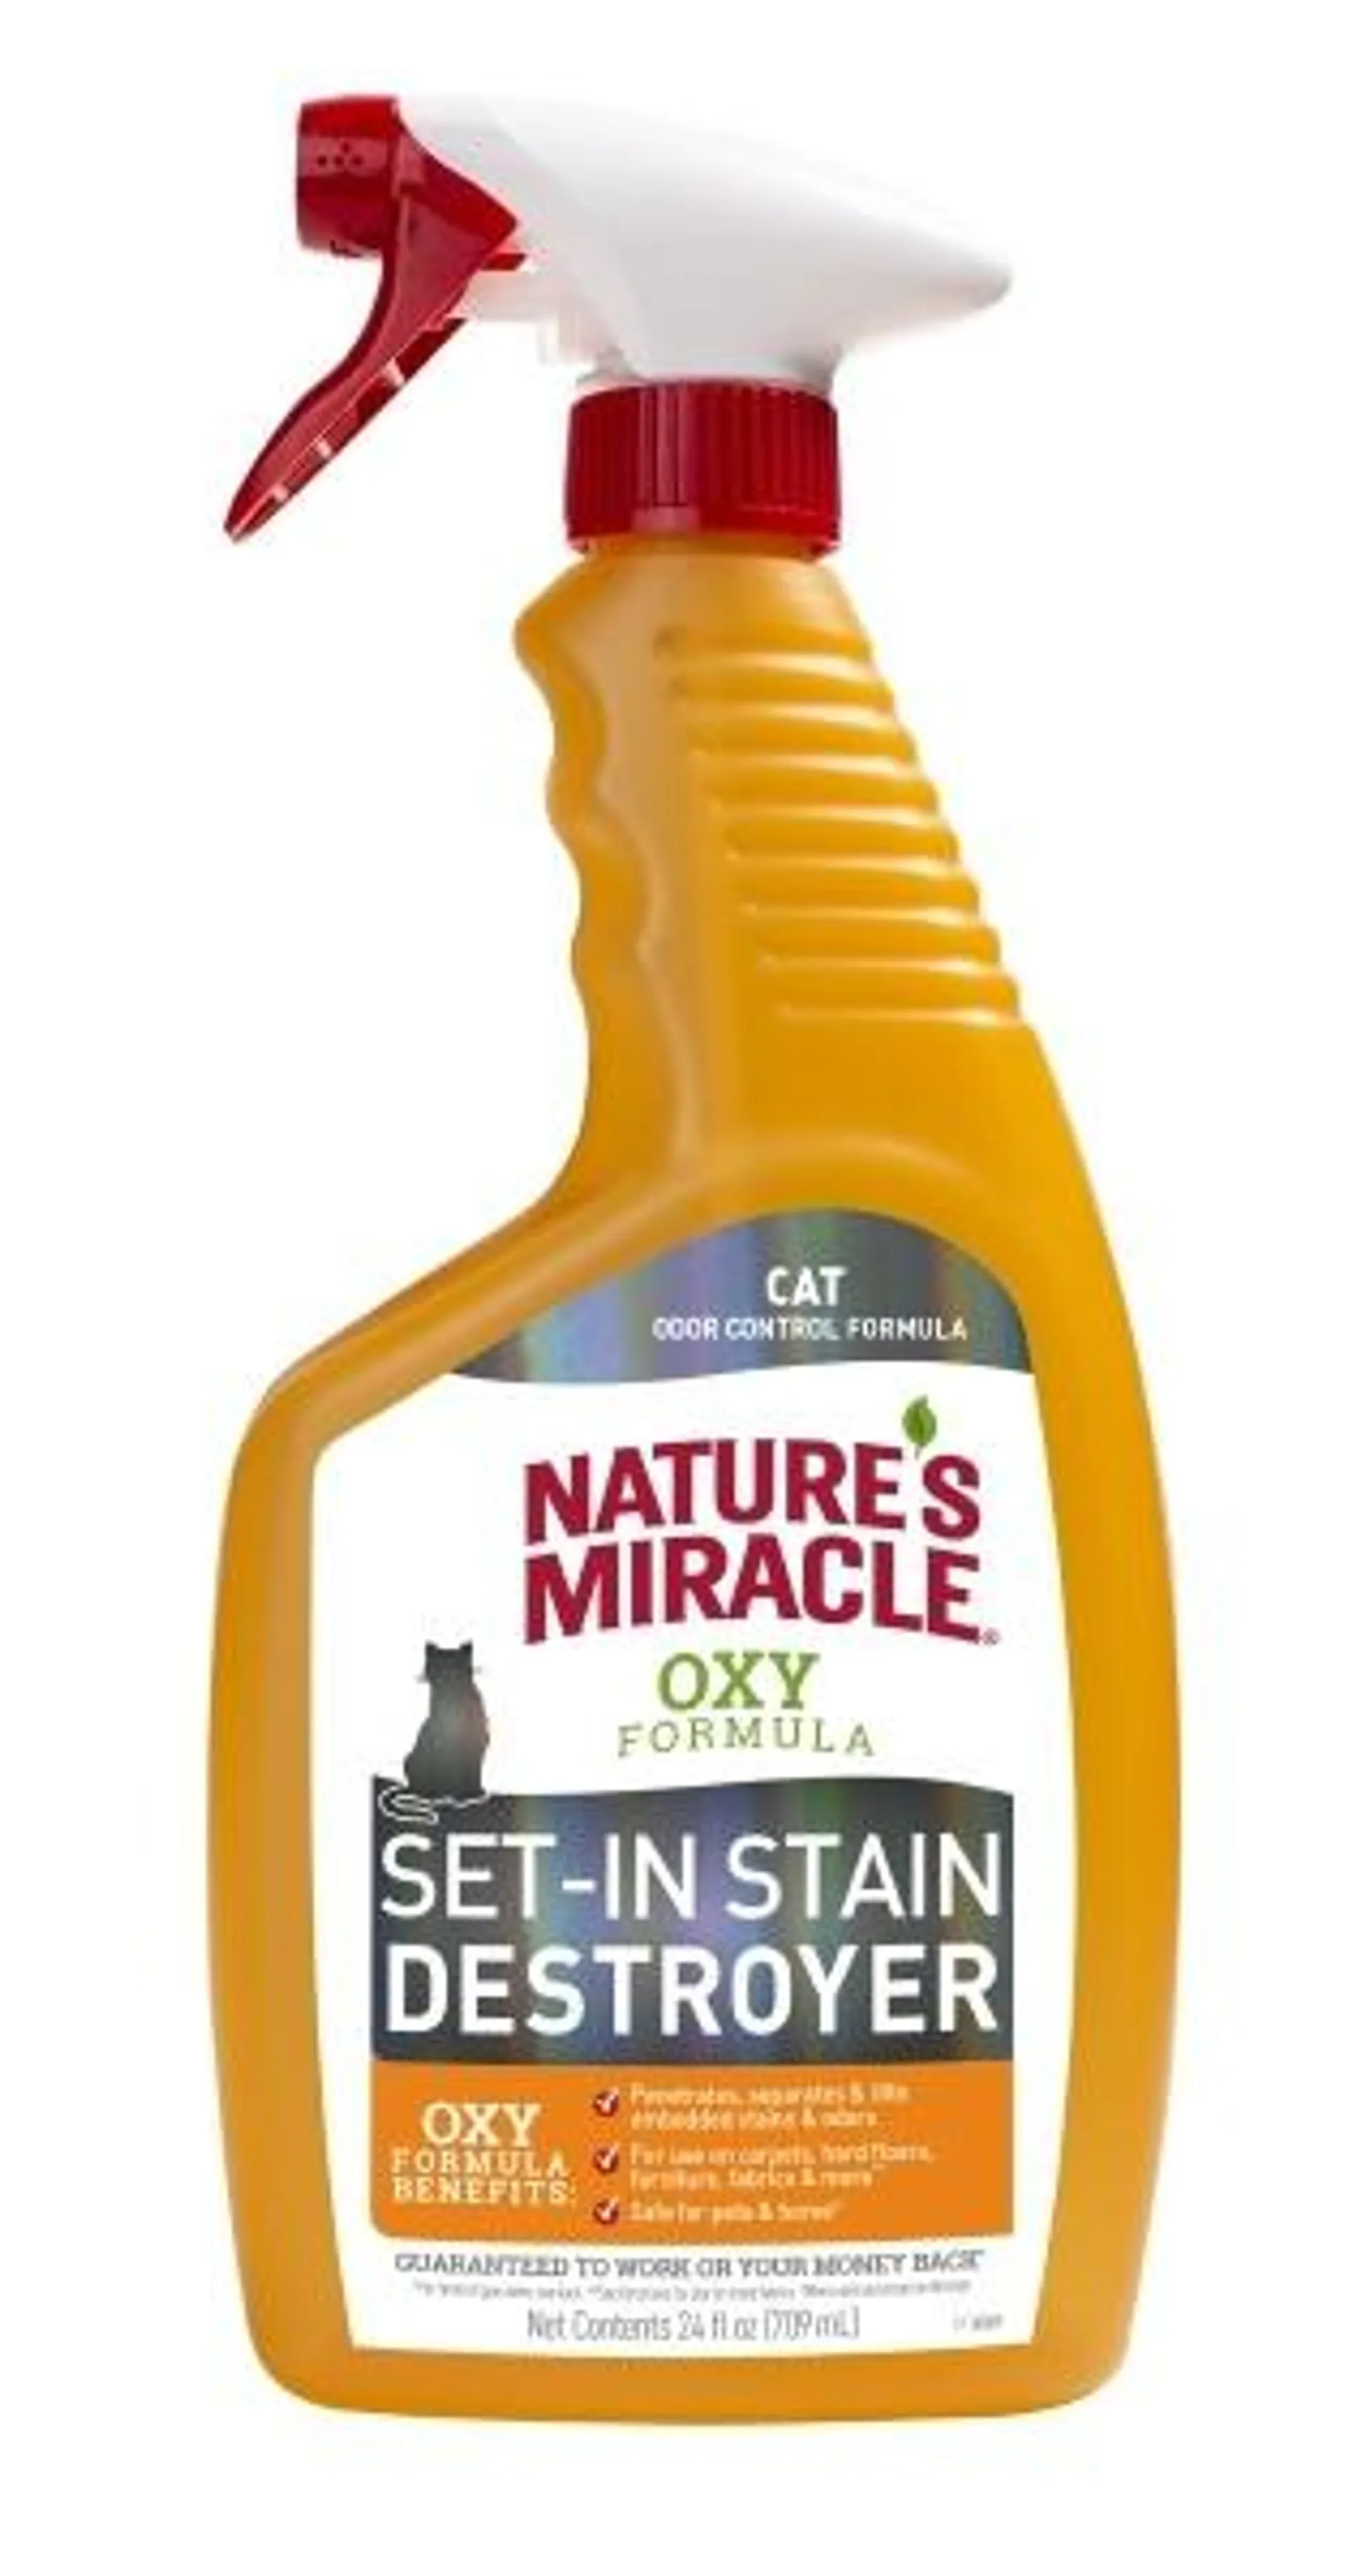 15% off Nature's Miracle